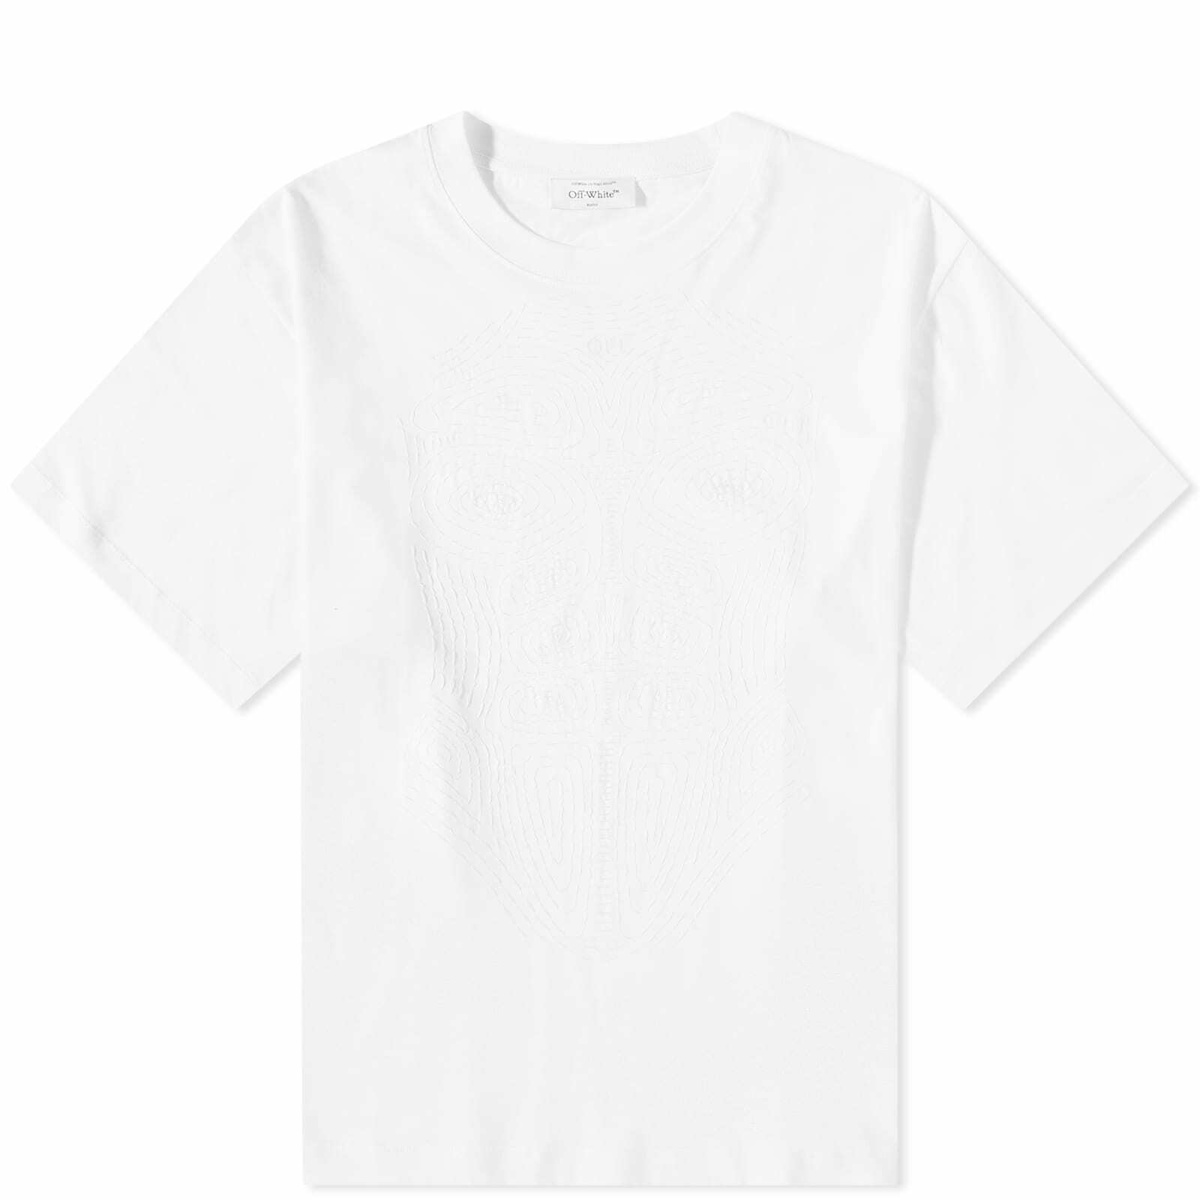 Off-White - Rave Flyer Skate Printed Cotton-Blend Jersey T-Shirt